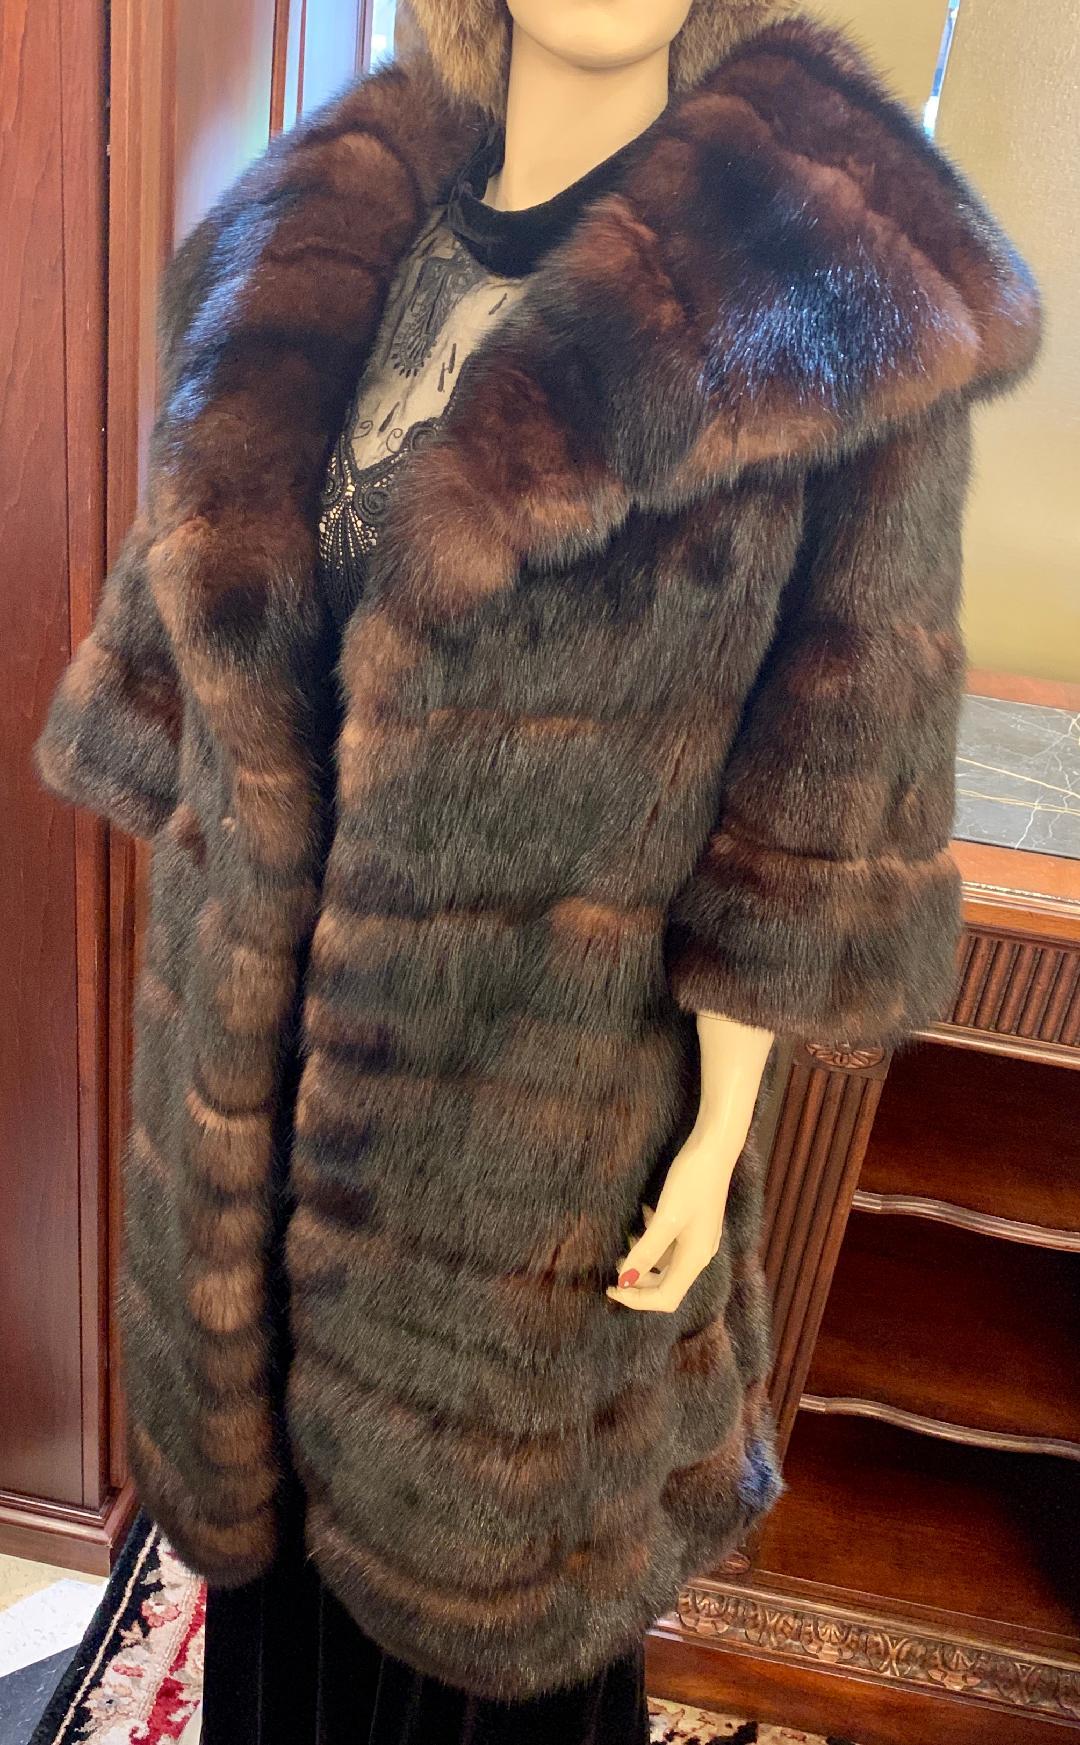 Very sophisticated and lavish, genuine regal Russian Sable fur coat features a large and very high fashion wide shawl style collar. The fur is a very rich, dark brown with beautiful shimmering lighter brown highlights - an indication of very